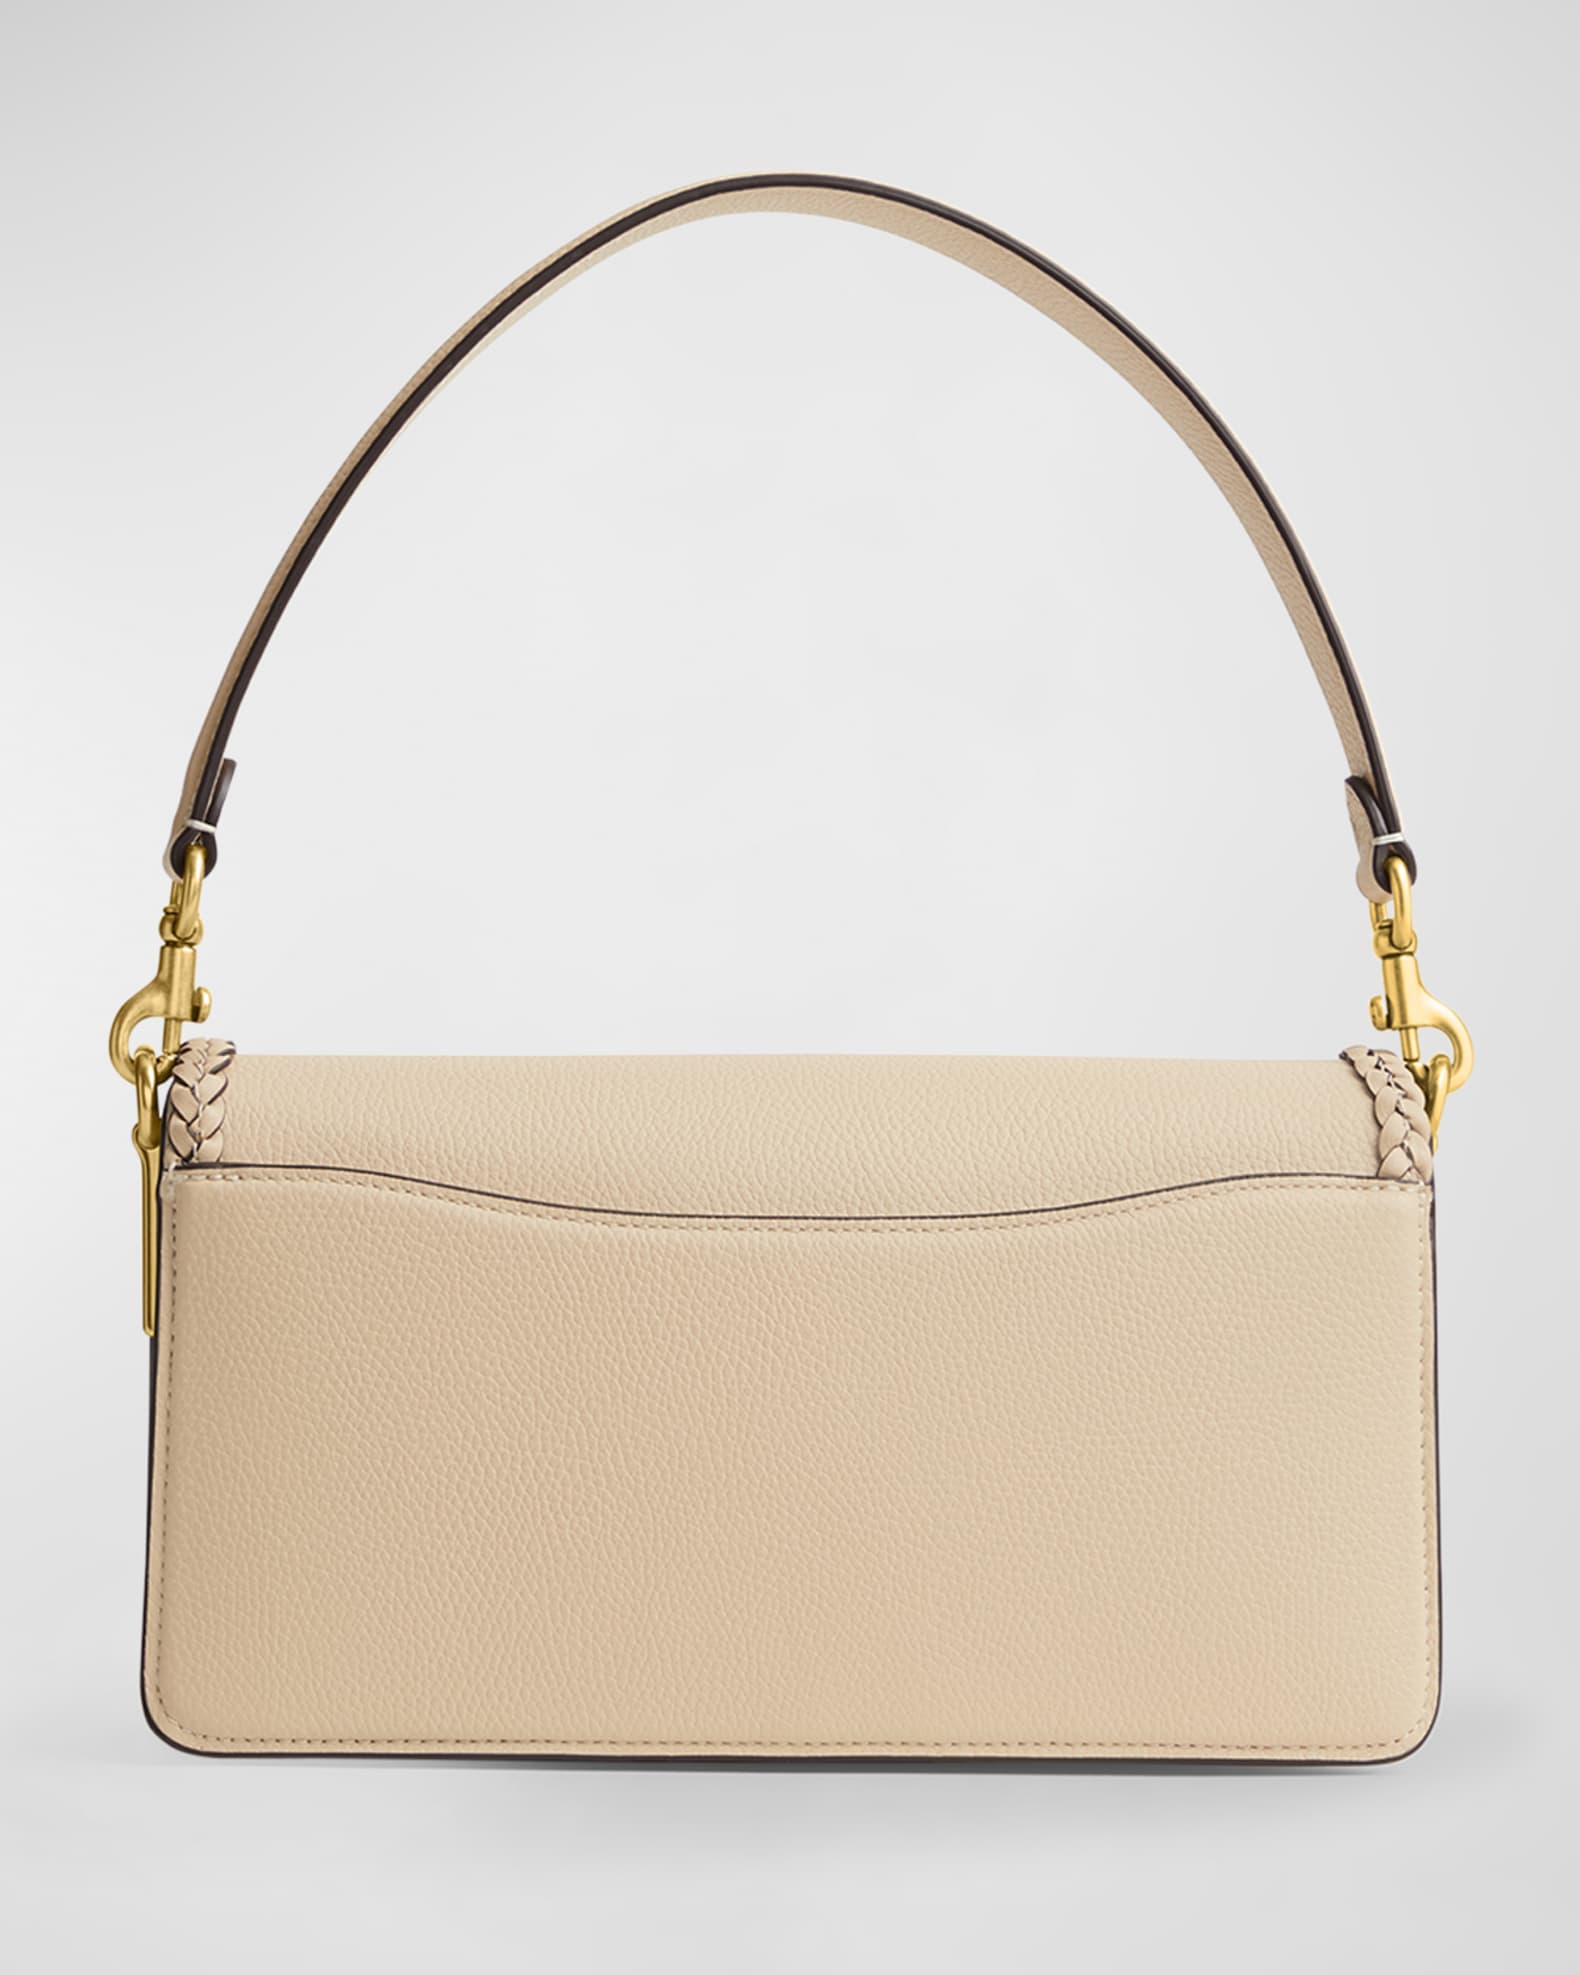 Coach Chalk Heart & Star Studded Leather Shoulder Bag, Best Price and  Reviews